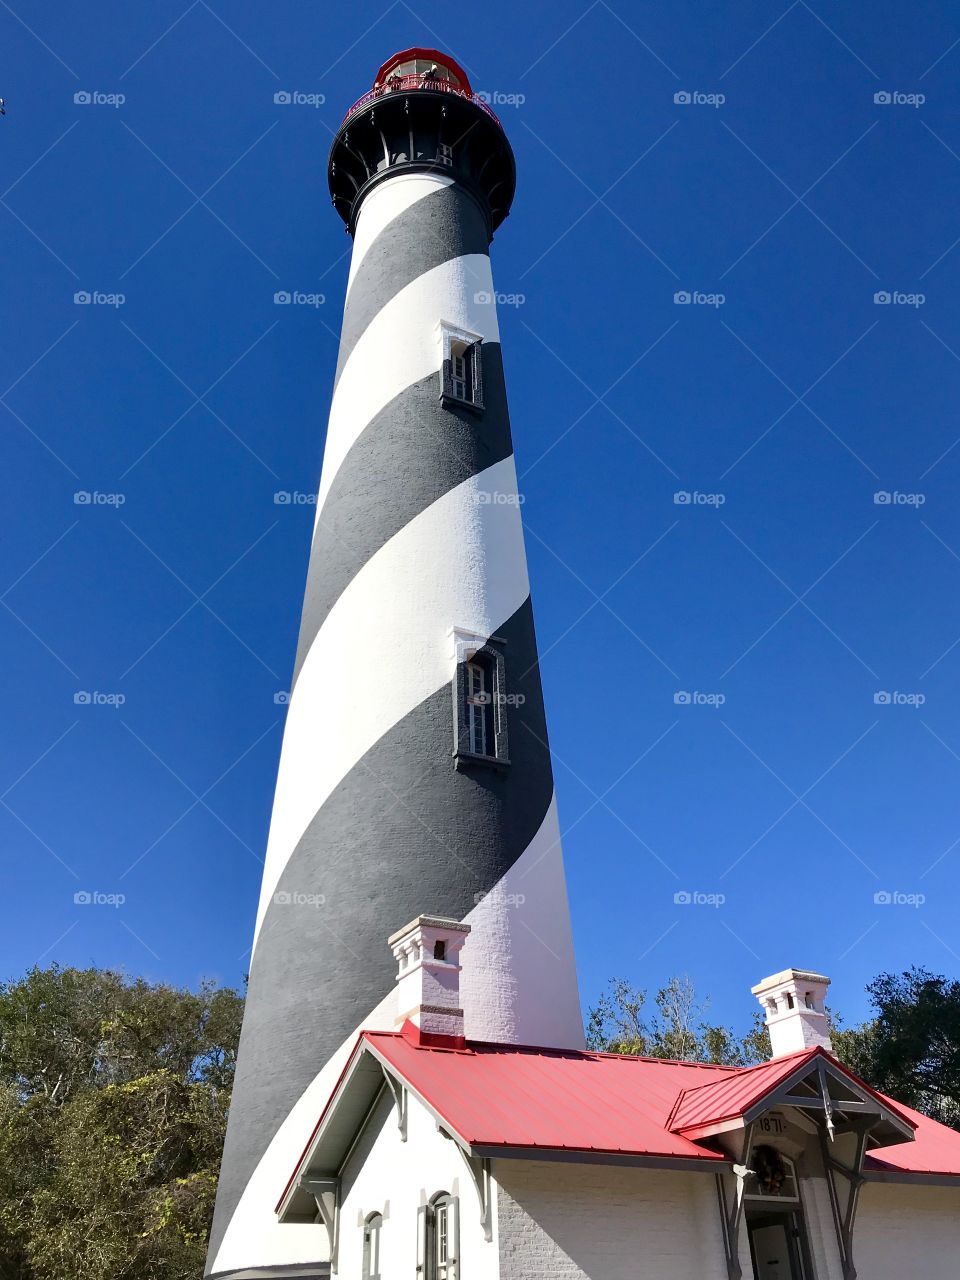 Black and white striped lighthouse against a clear blue sky 